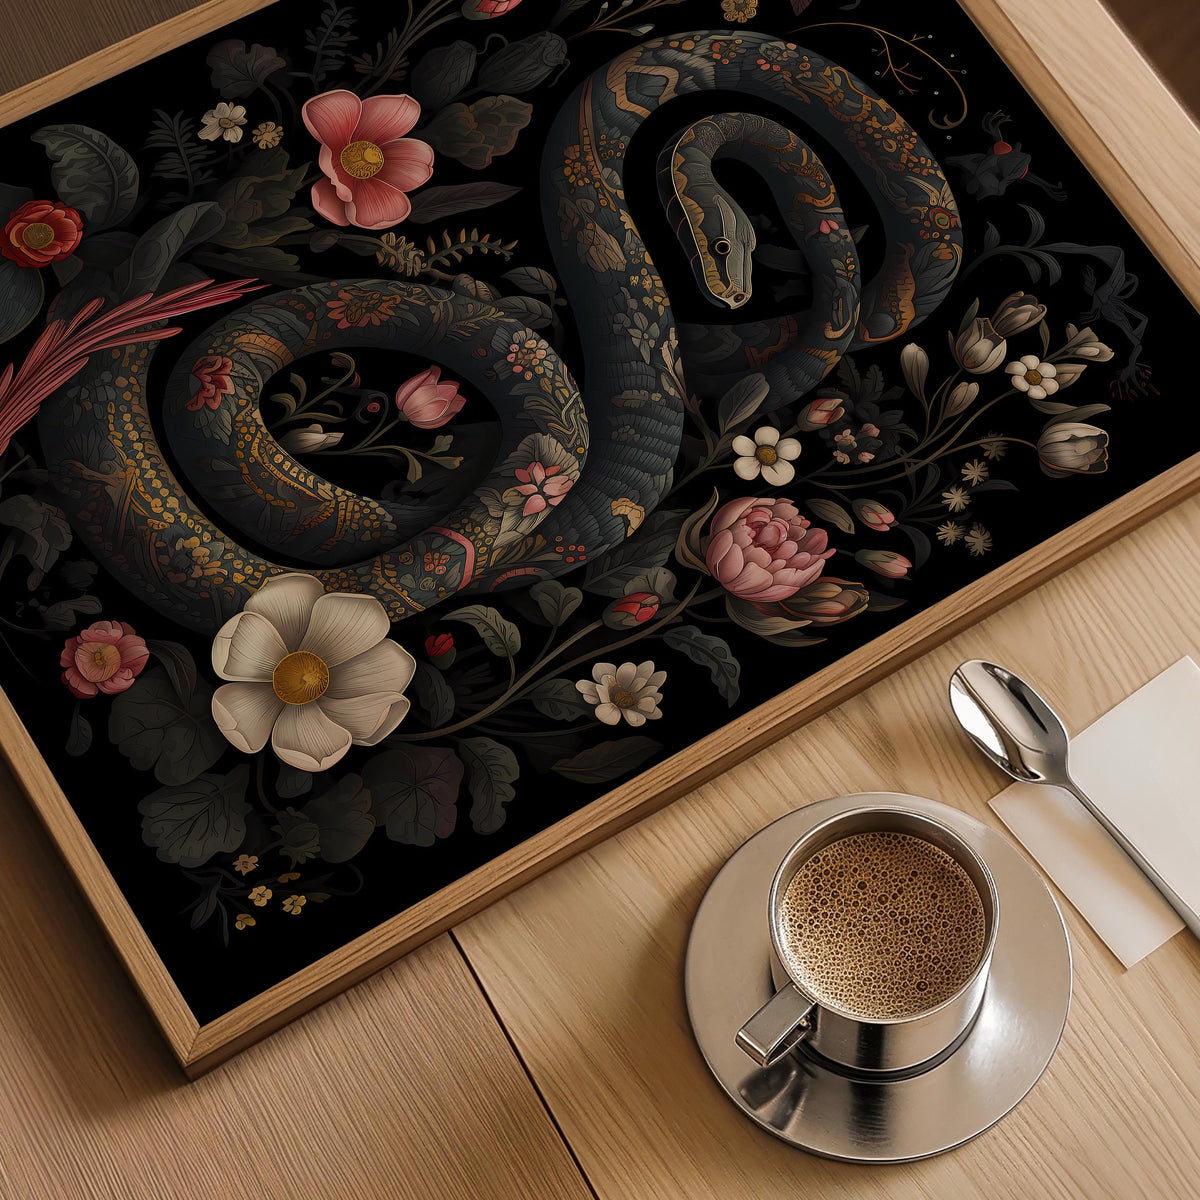 a cup of coffee next to a painting of a snake